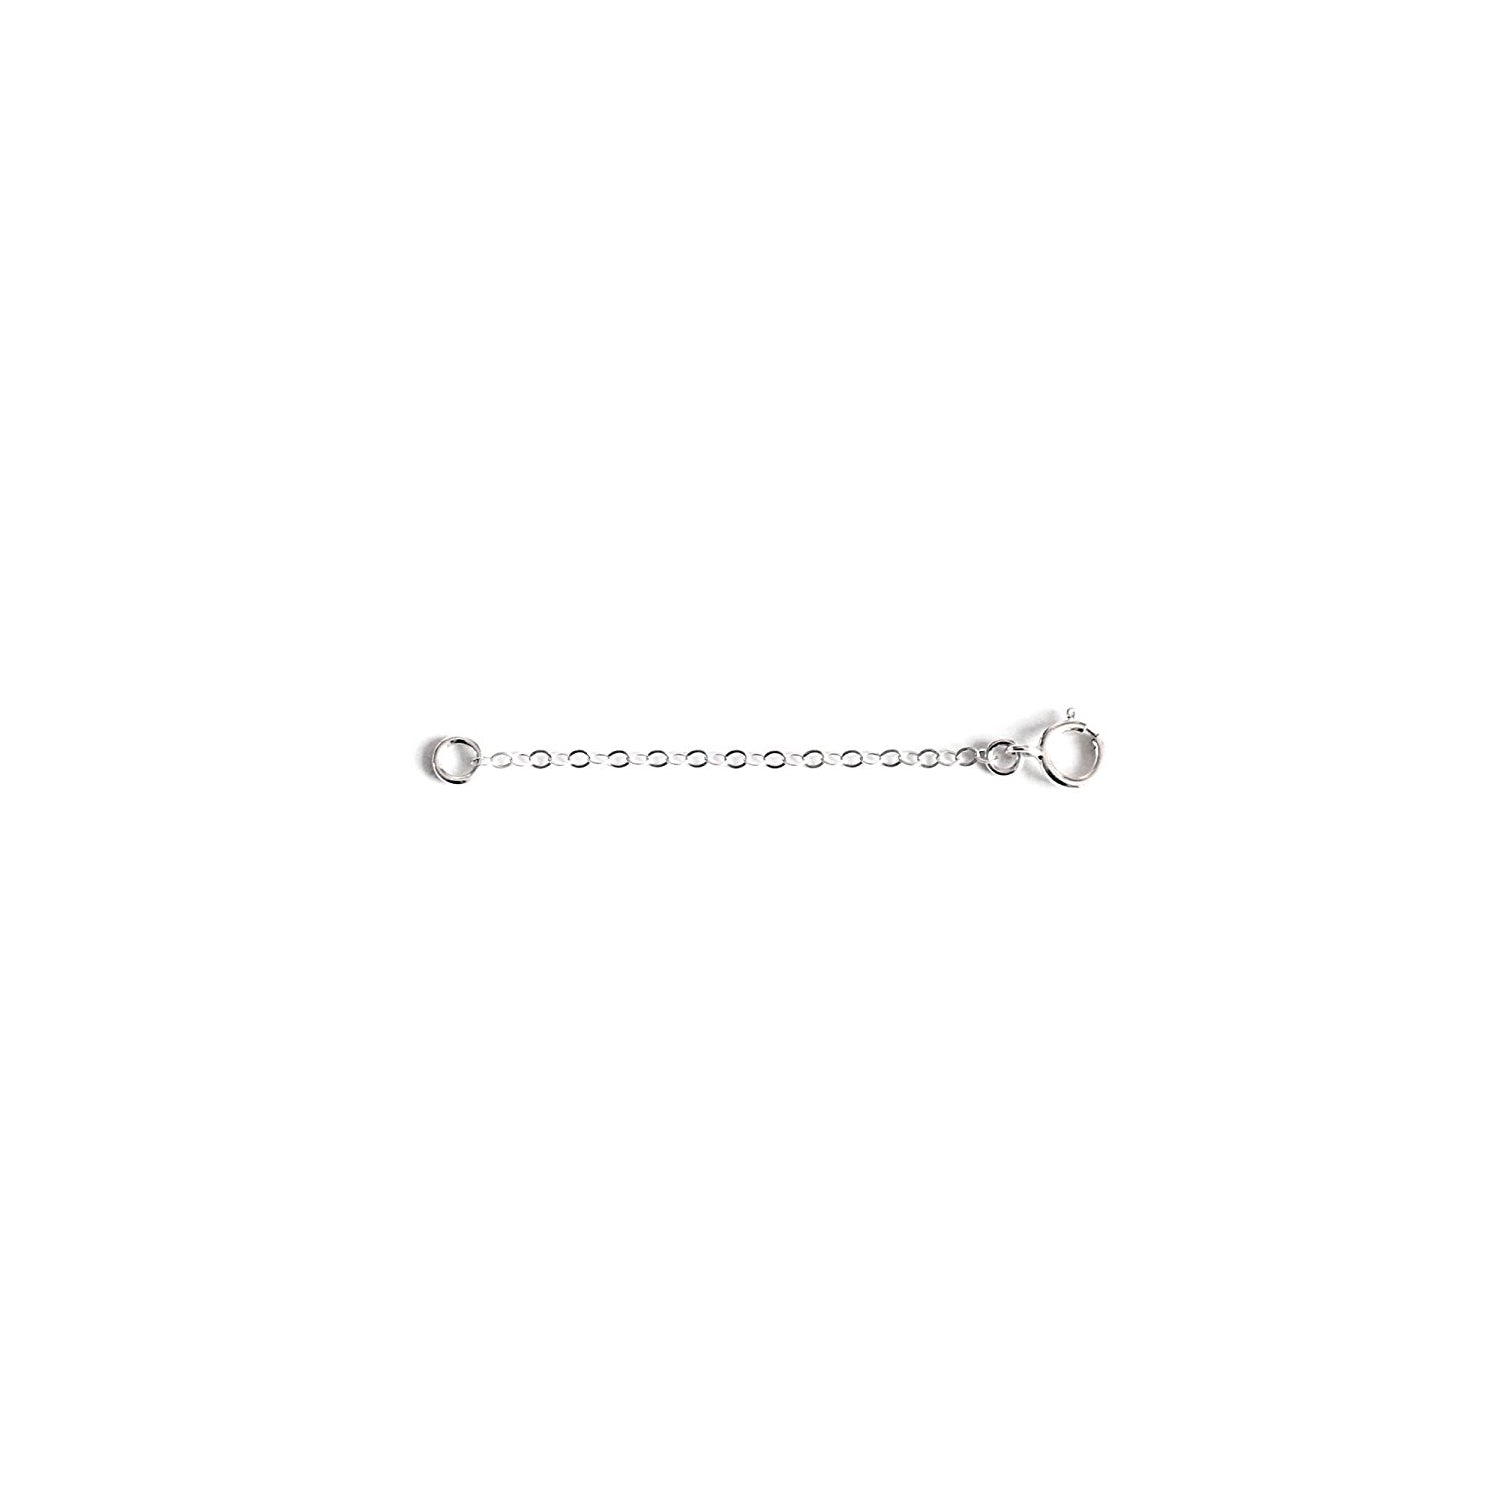 PRIMROSE Sterling Silver Rolo Chain Extender - 2 in.